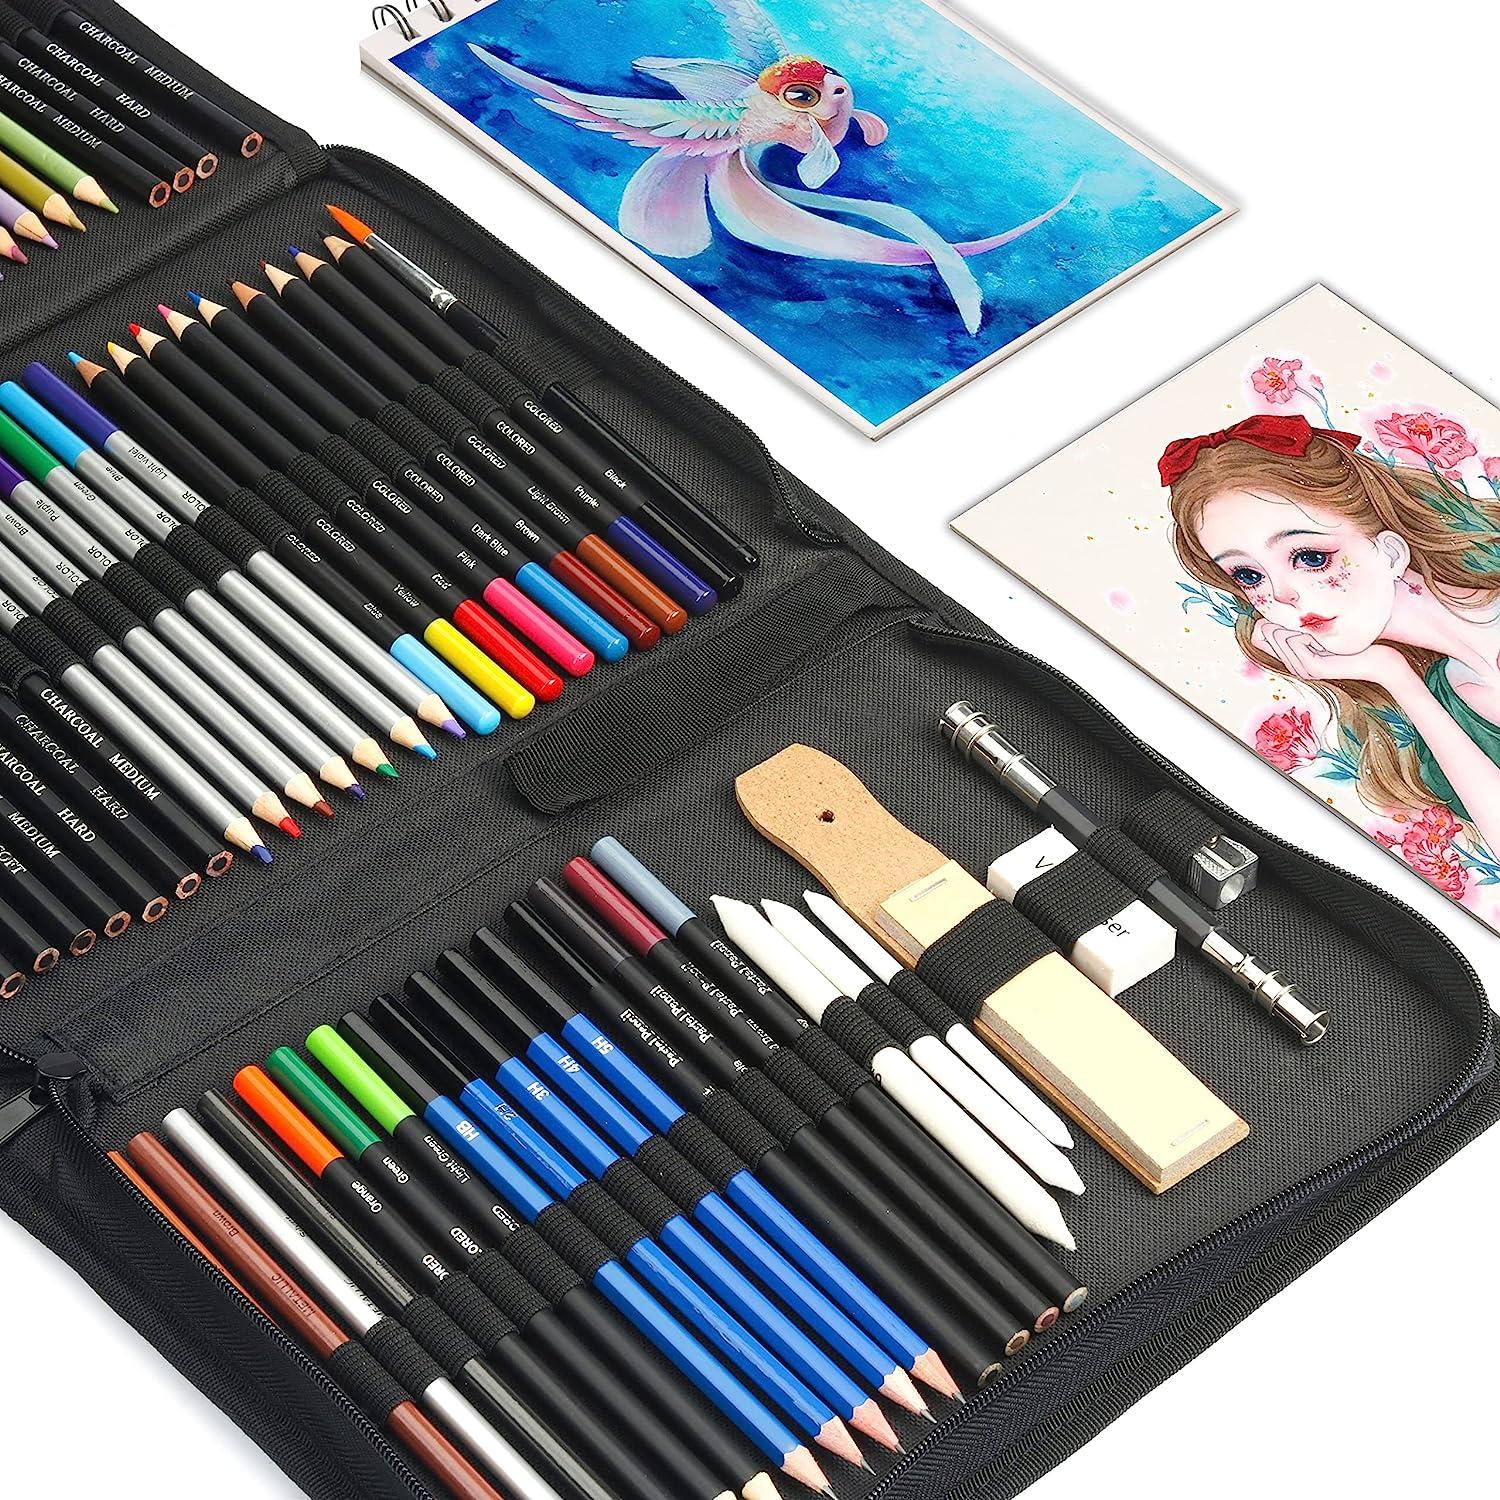 Professional Art kit, 60 Piece Drawing and Sketching Art Set, Colored  Pencils and Charcoal Pencils in Wooden Box, Art Supplies for Kids, Teens  and Adults